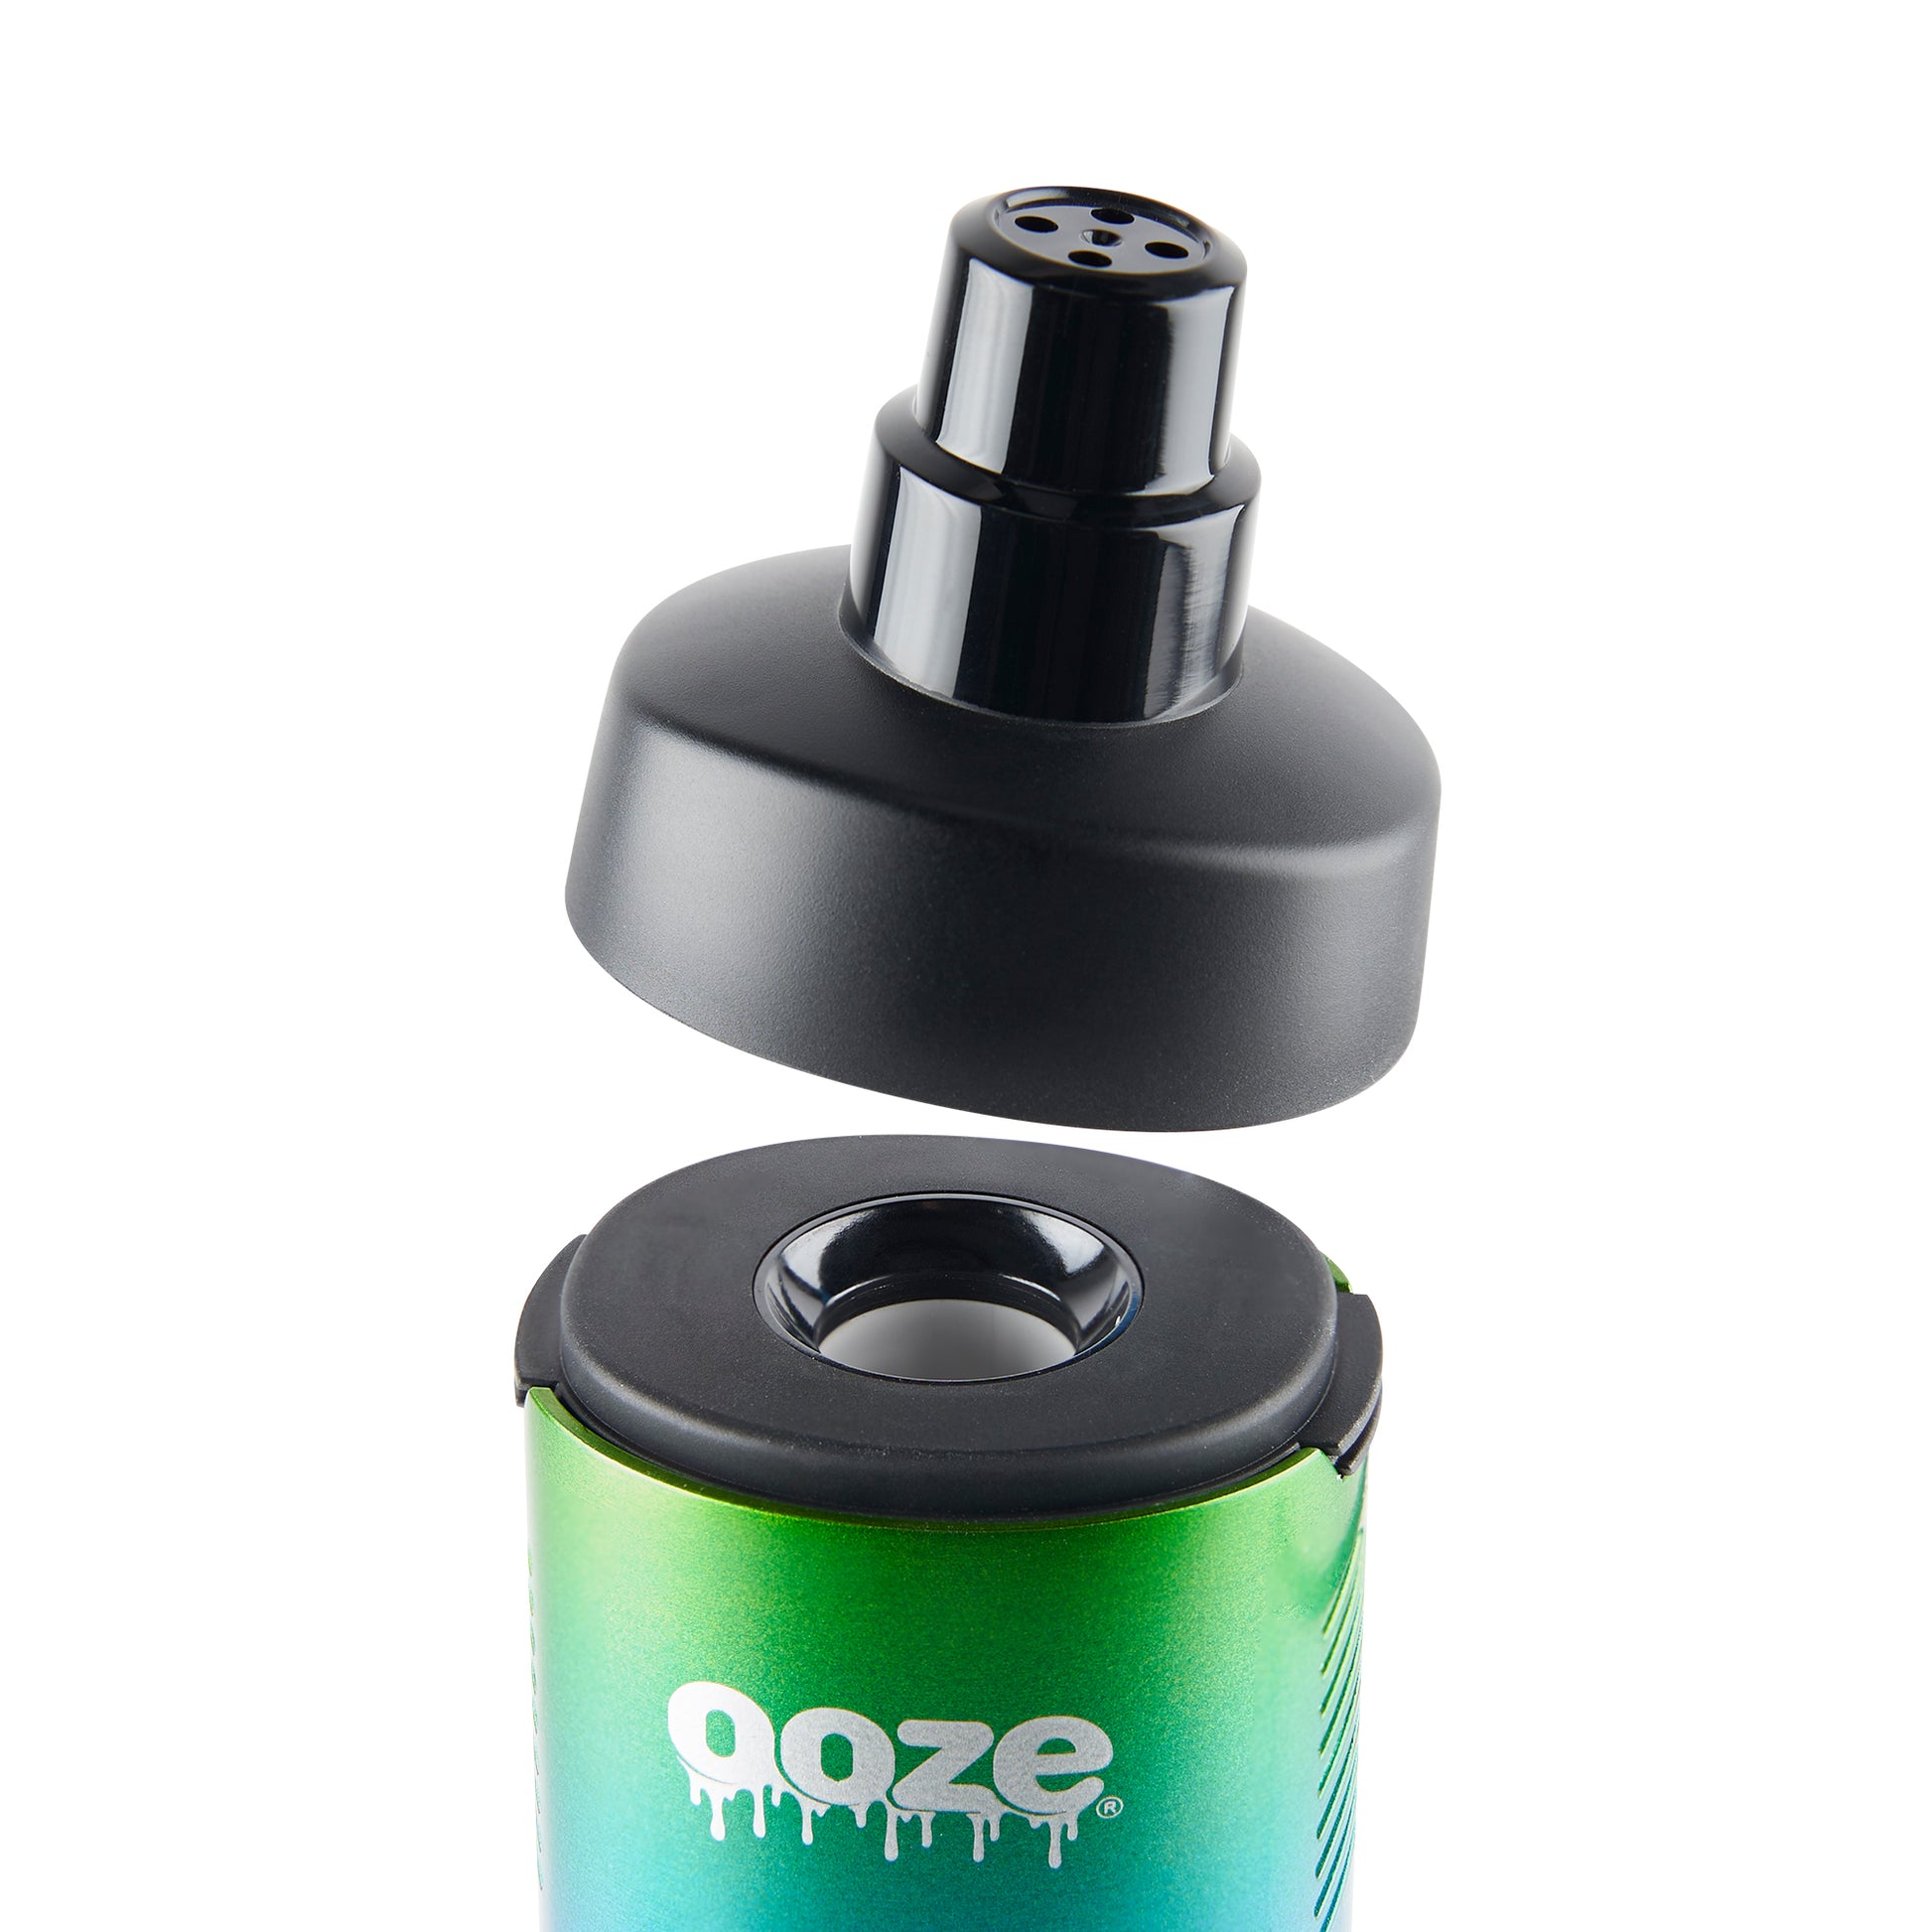 Ooze Verge Water Pipe Adapter - Use Your Flower Vape in a Bong